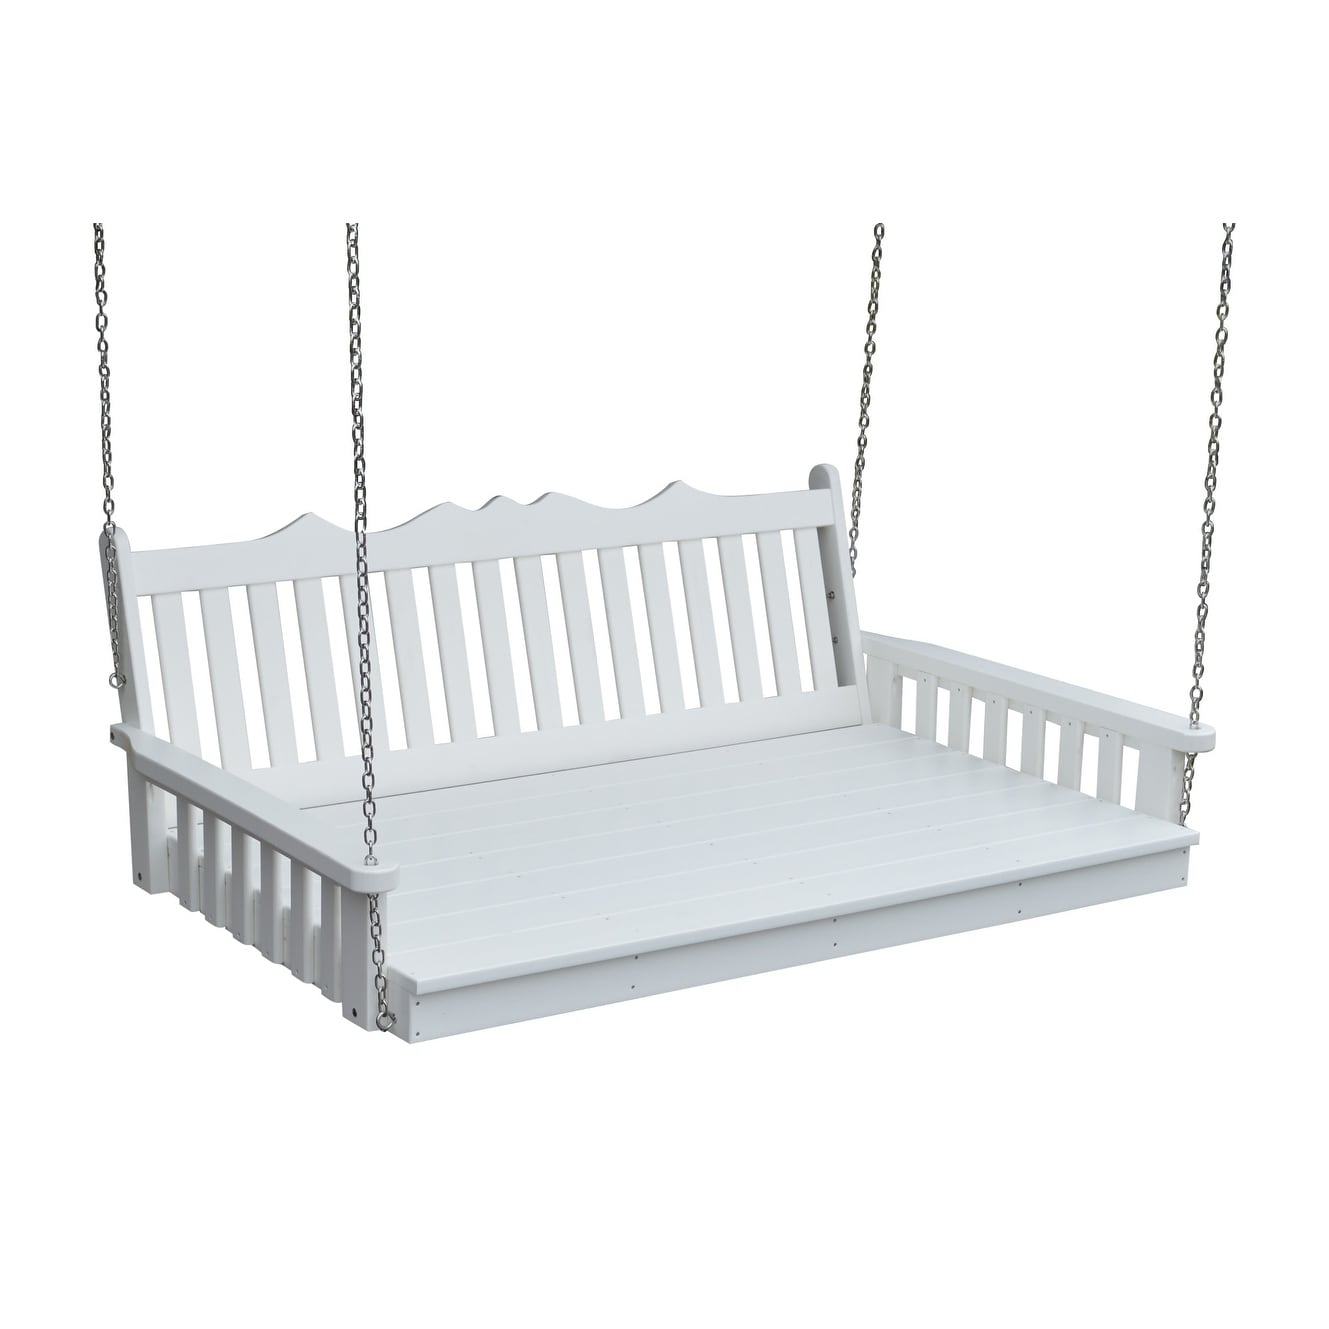 Kunkle Holdings LLC Poly 75 inch Royal English Swingbed